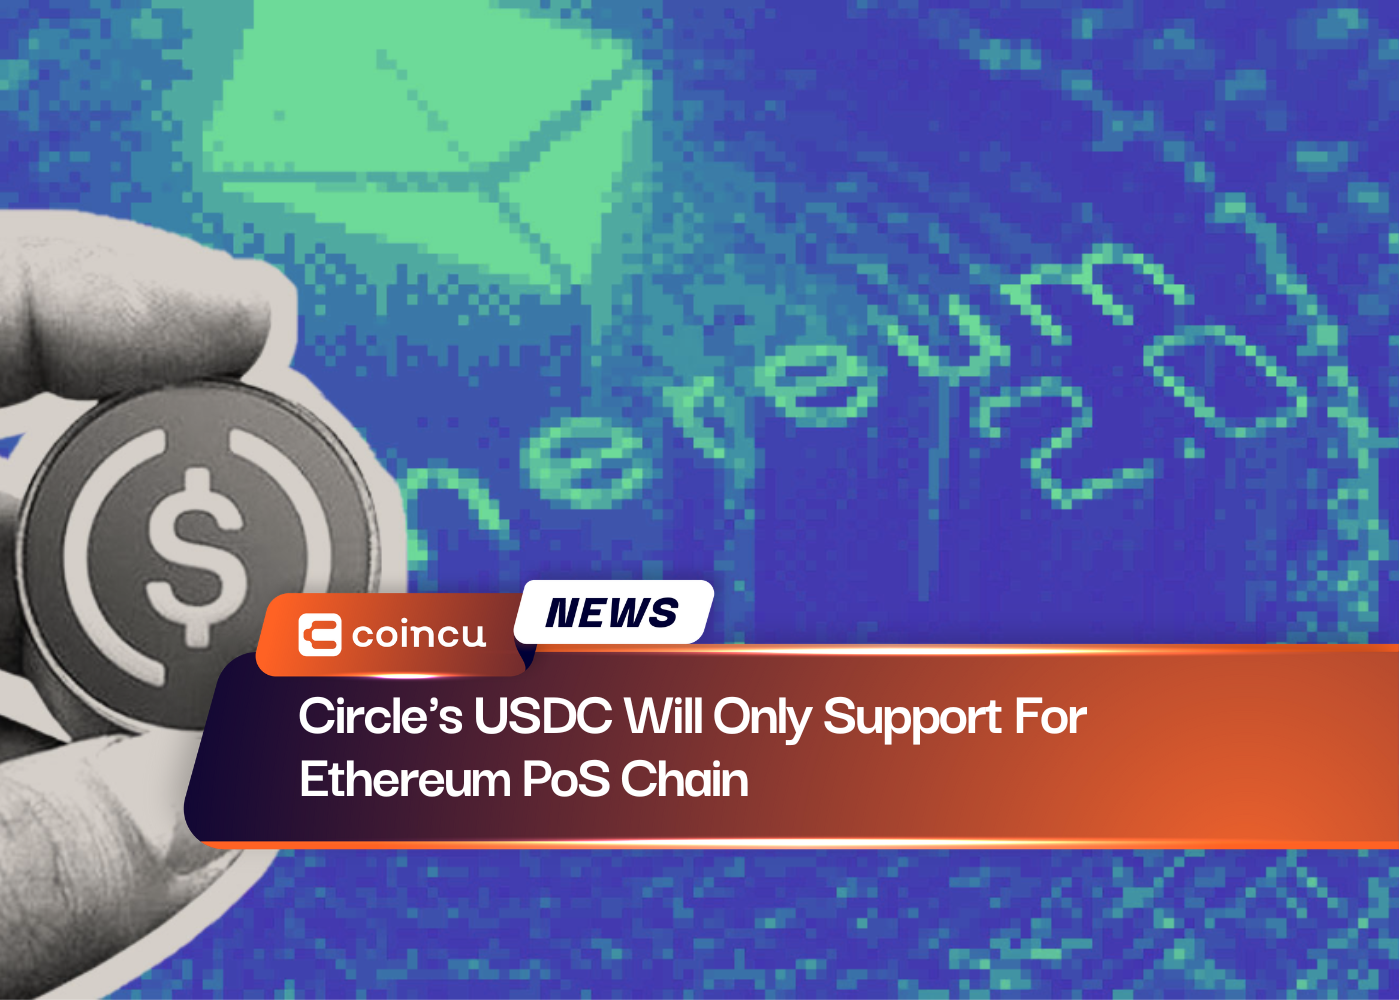 Circle's USDC Will Only Support For Ethereum PoS Chain